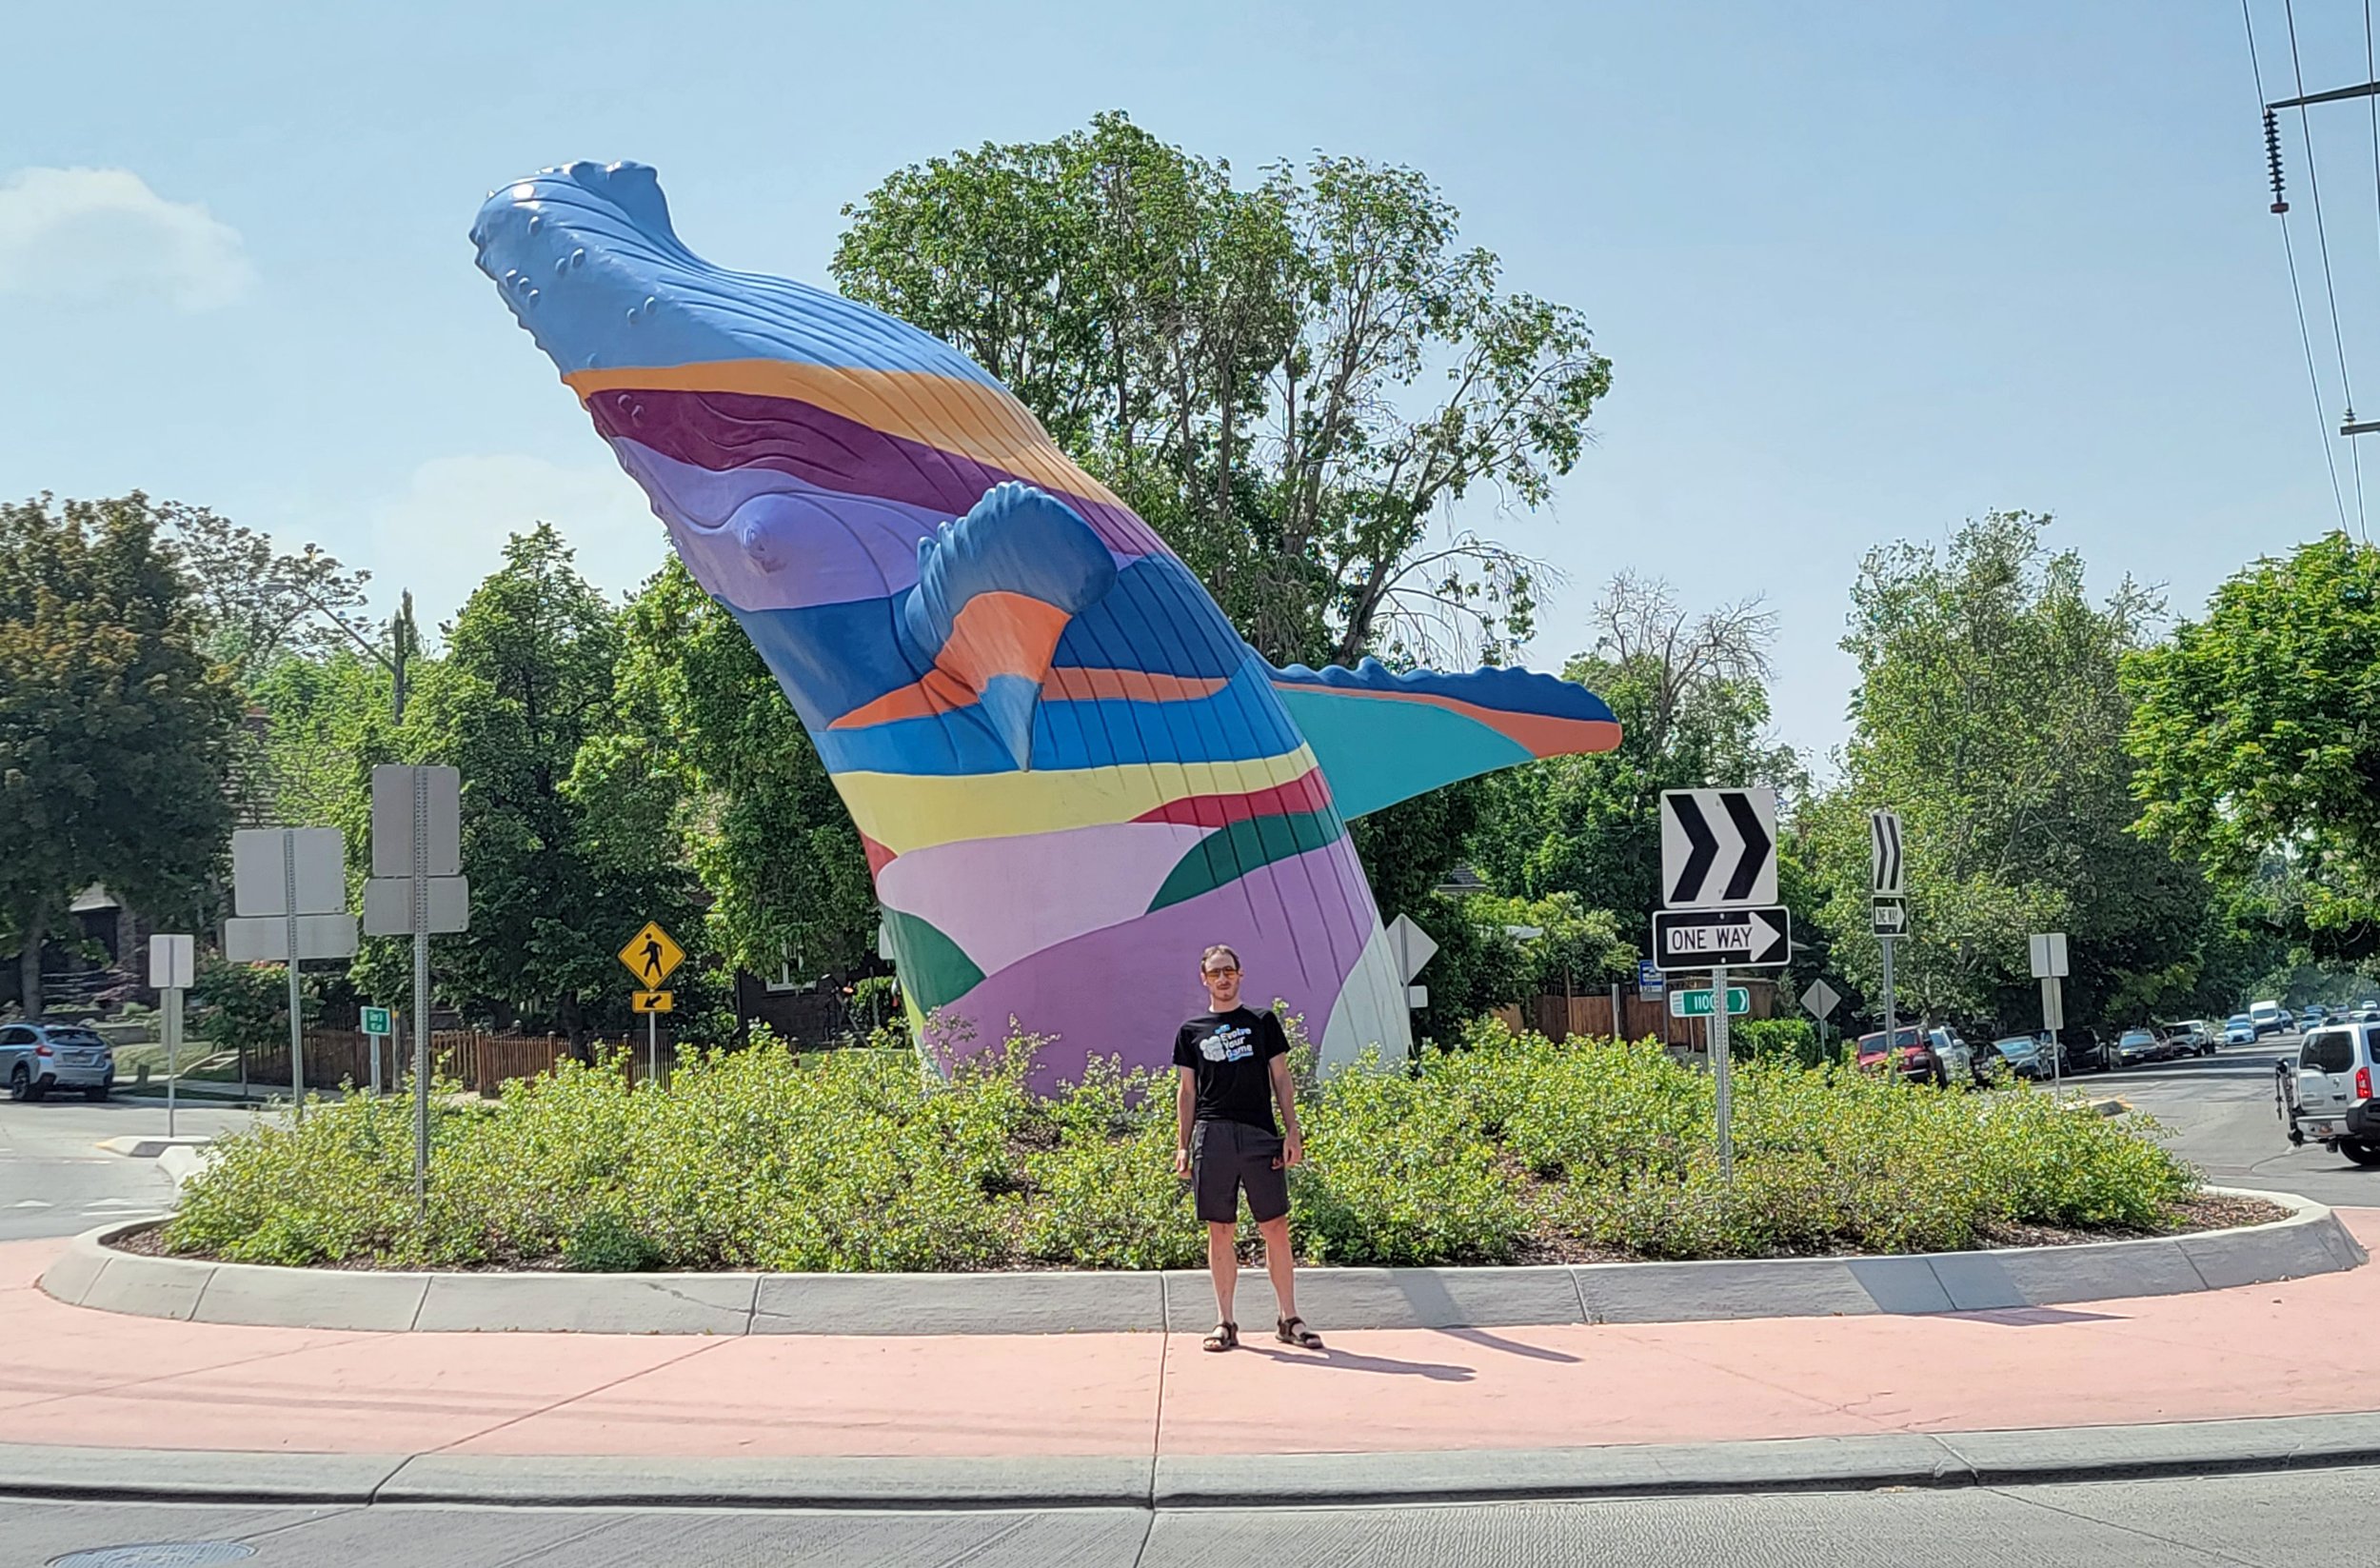 Really cool life-sized rainbow humpback whale at a traffic circle in Salt Lake City.